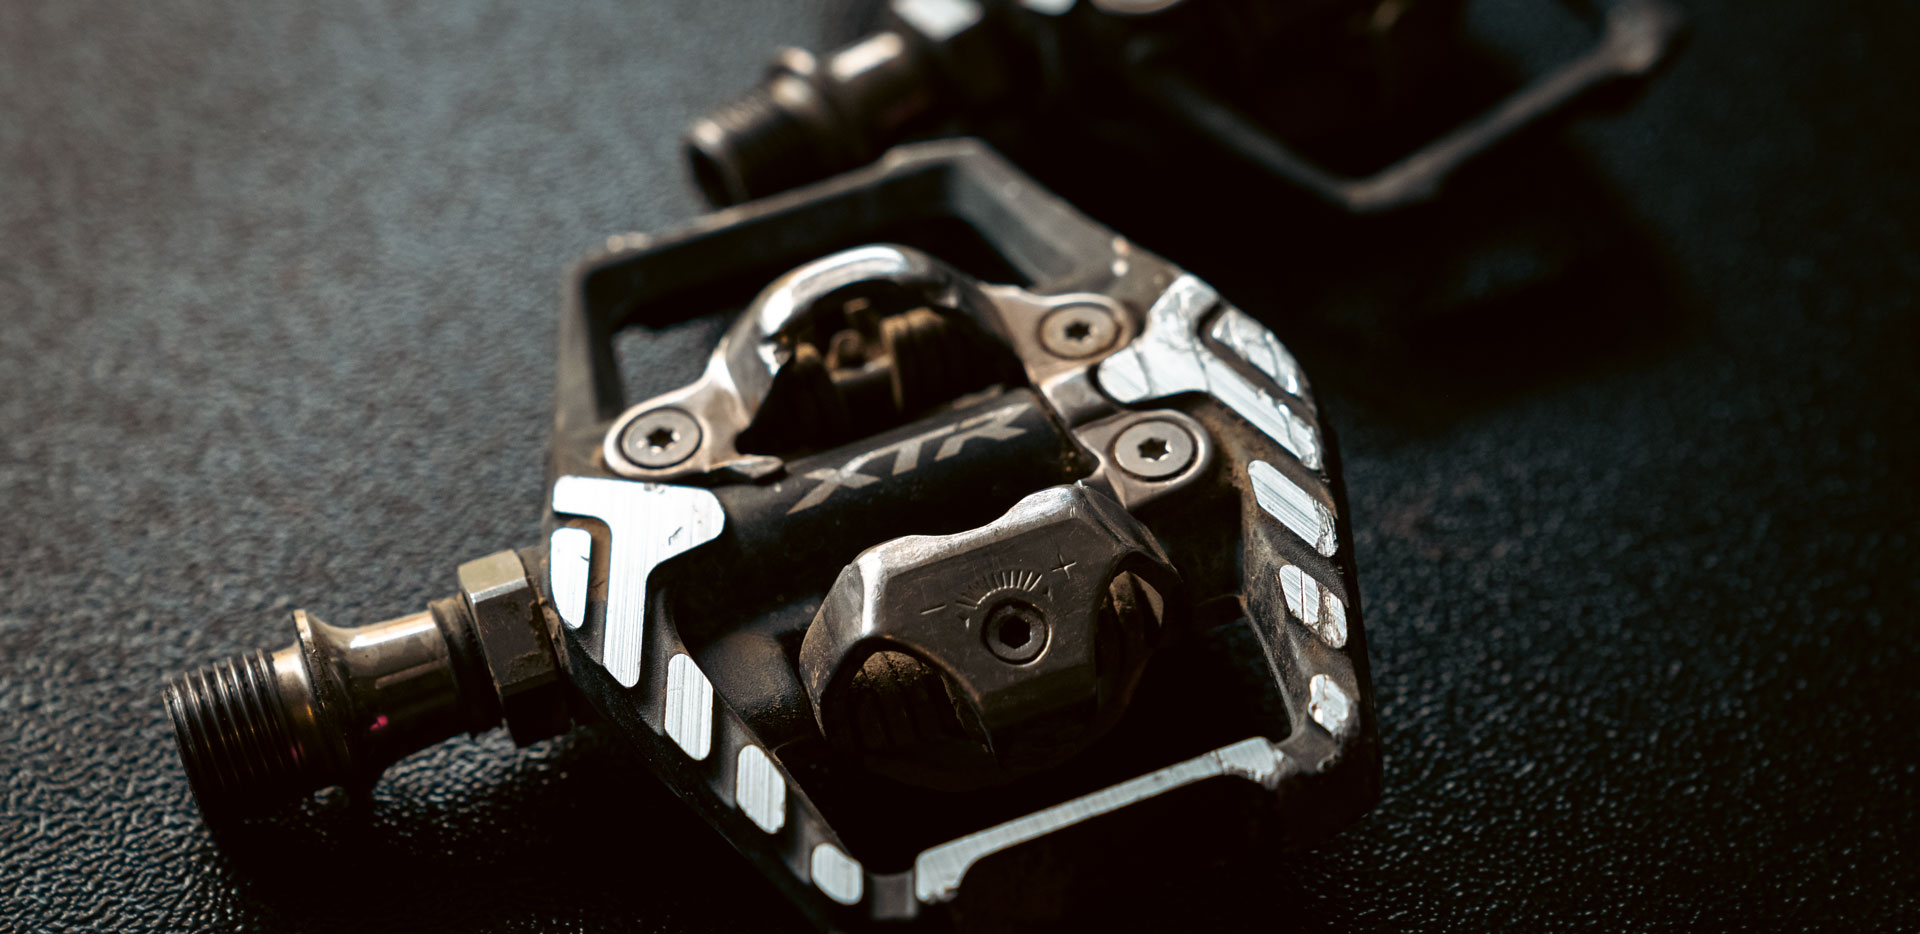 Shimano XTR Clipless Pedal Review